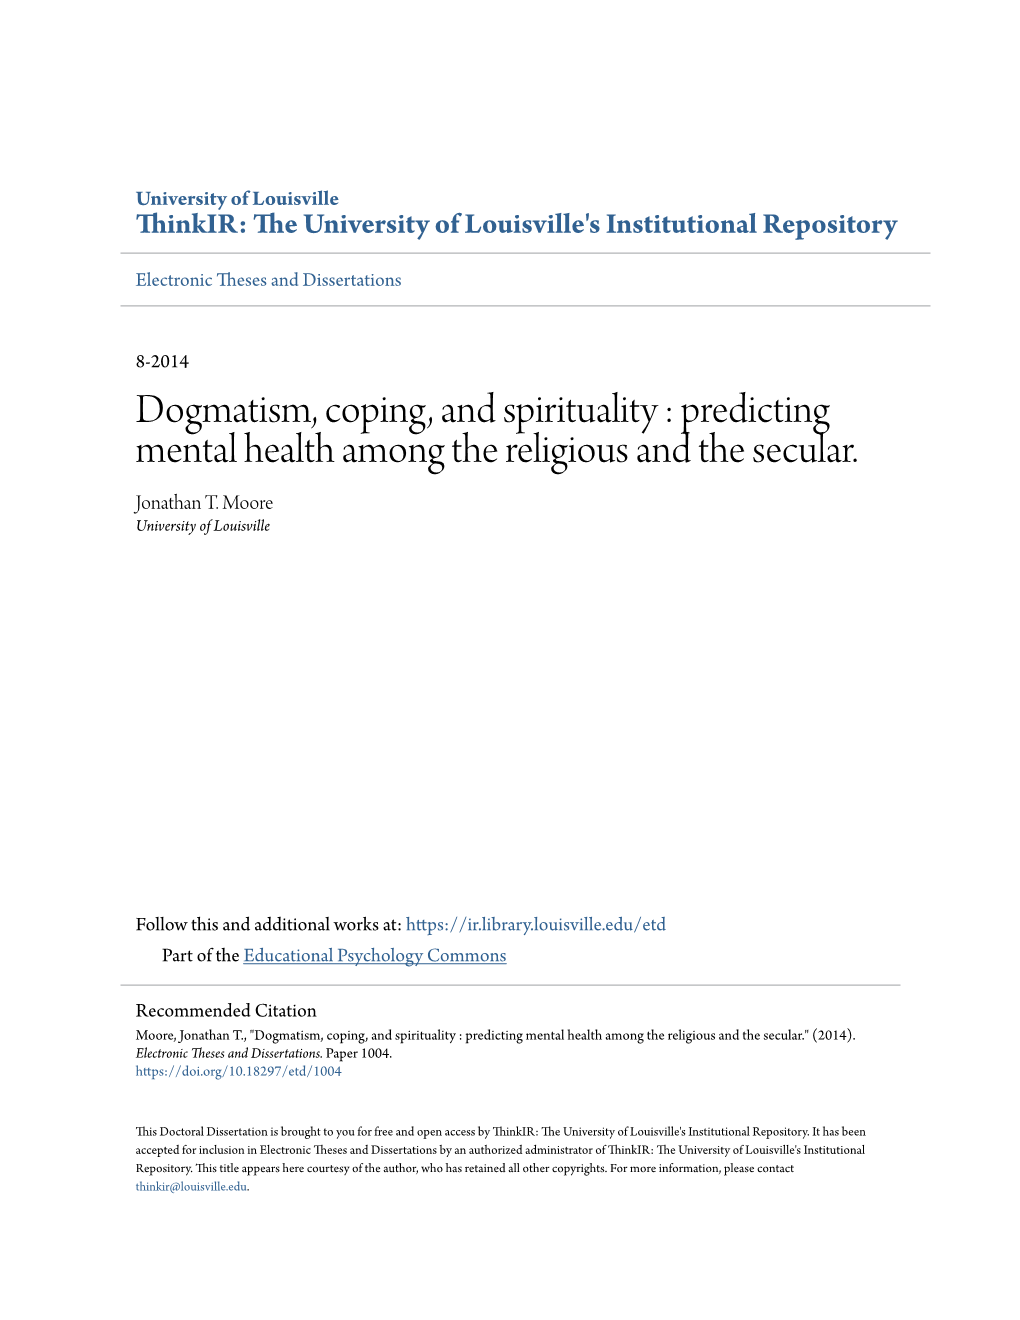 Dogmatism, Coping, and Spirituality : Predicting Mental Health Among the Religious and the Secular